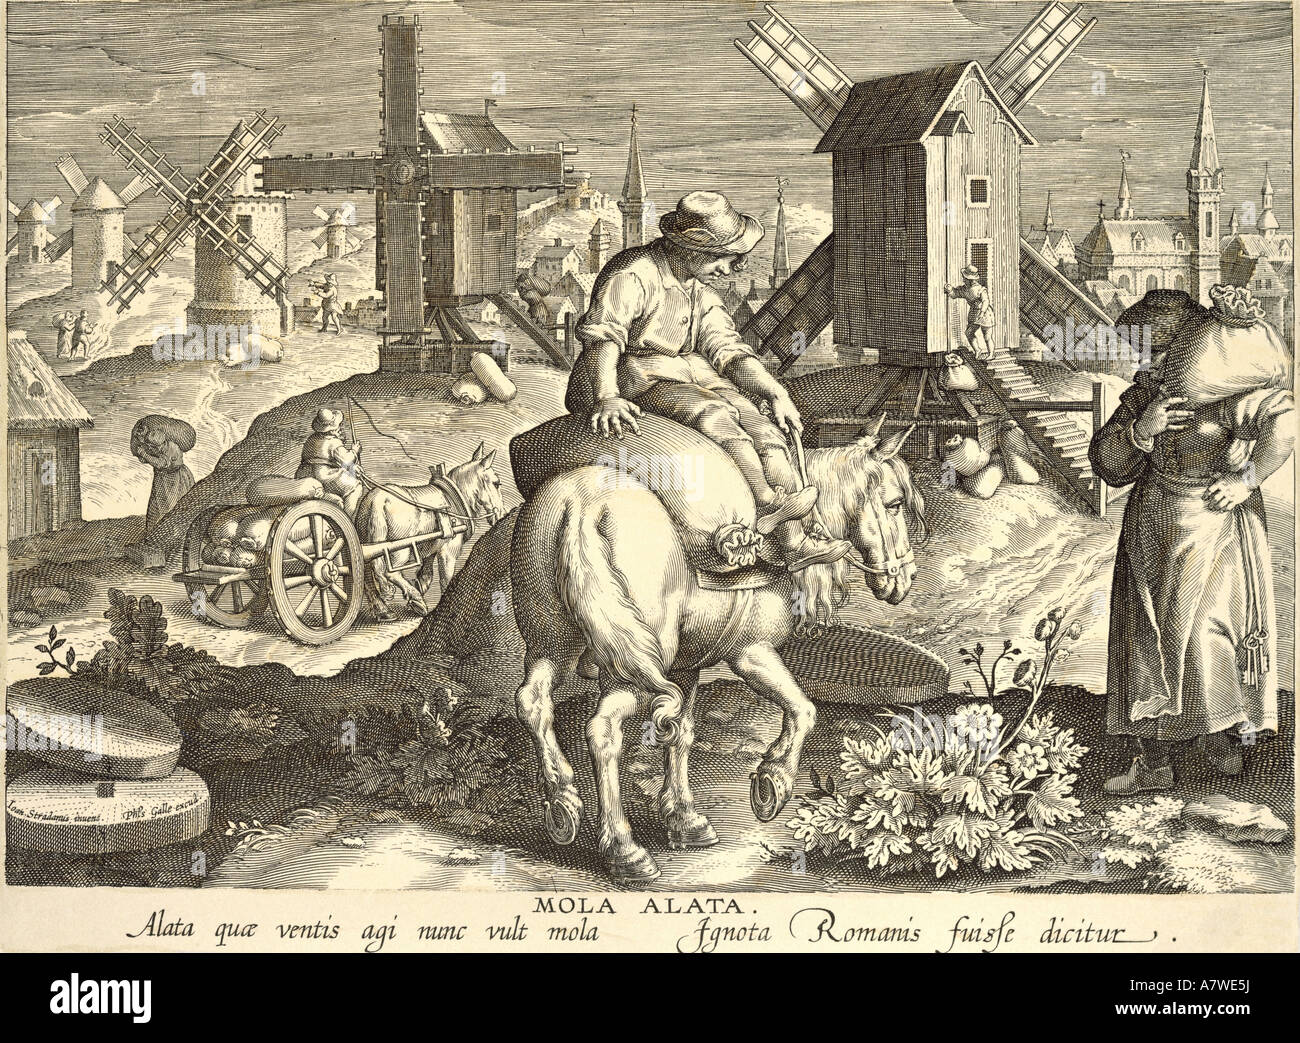 Straet, Jan van der, 1523 - 11.2.1605, Flemish painter, works, 'Nova Reperta', shet 'nvention of windmills', engraving by Theodor Galle or Jan Collart, circa 1580, private collection, , Artist's Copyright has not to be cleared Stock Photo